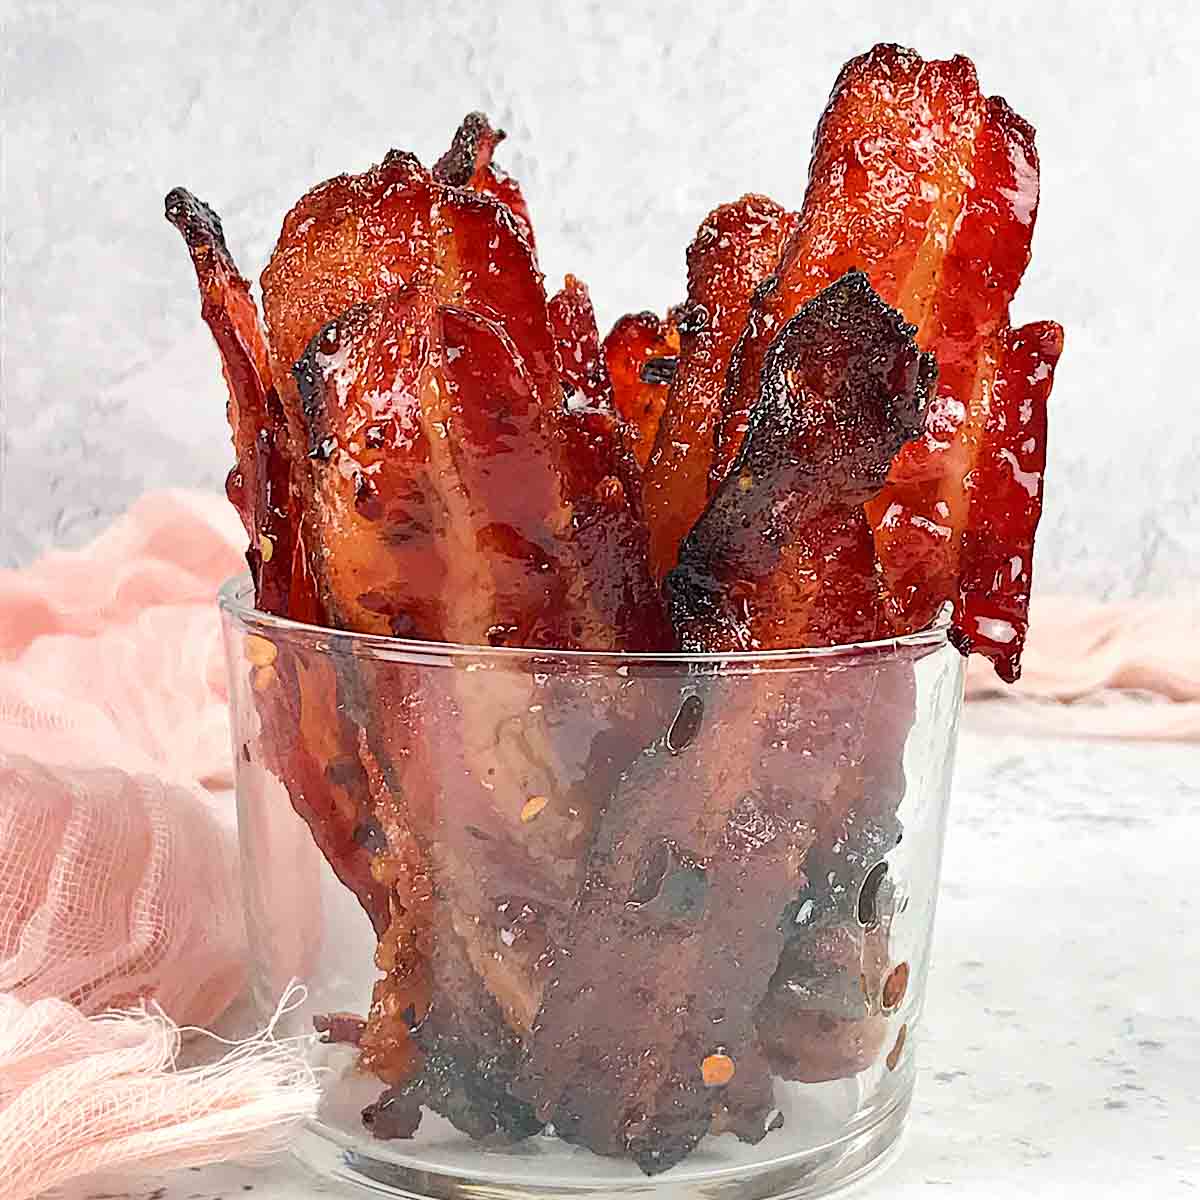 Million dollar Bacon (Candied Bacon) in Air fryer or Oven